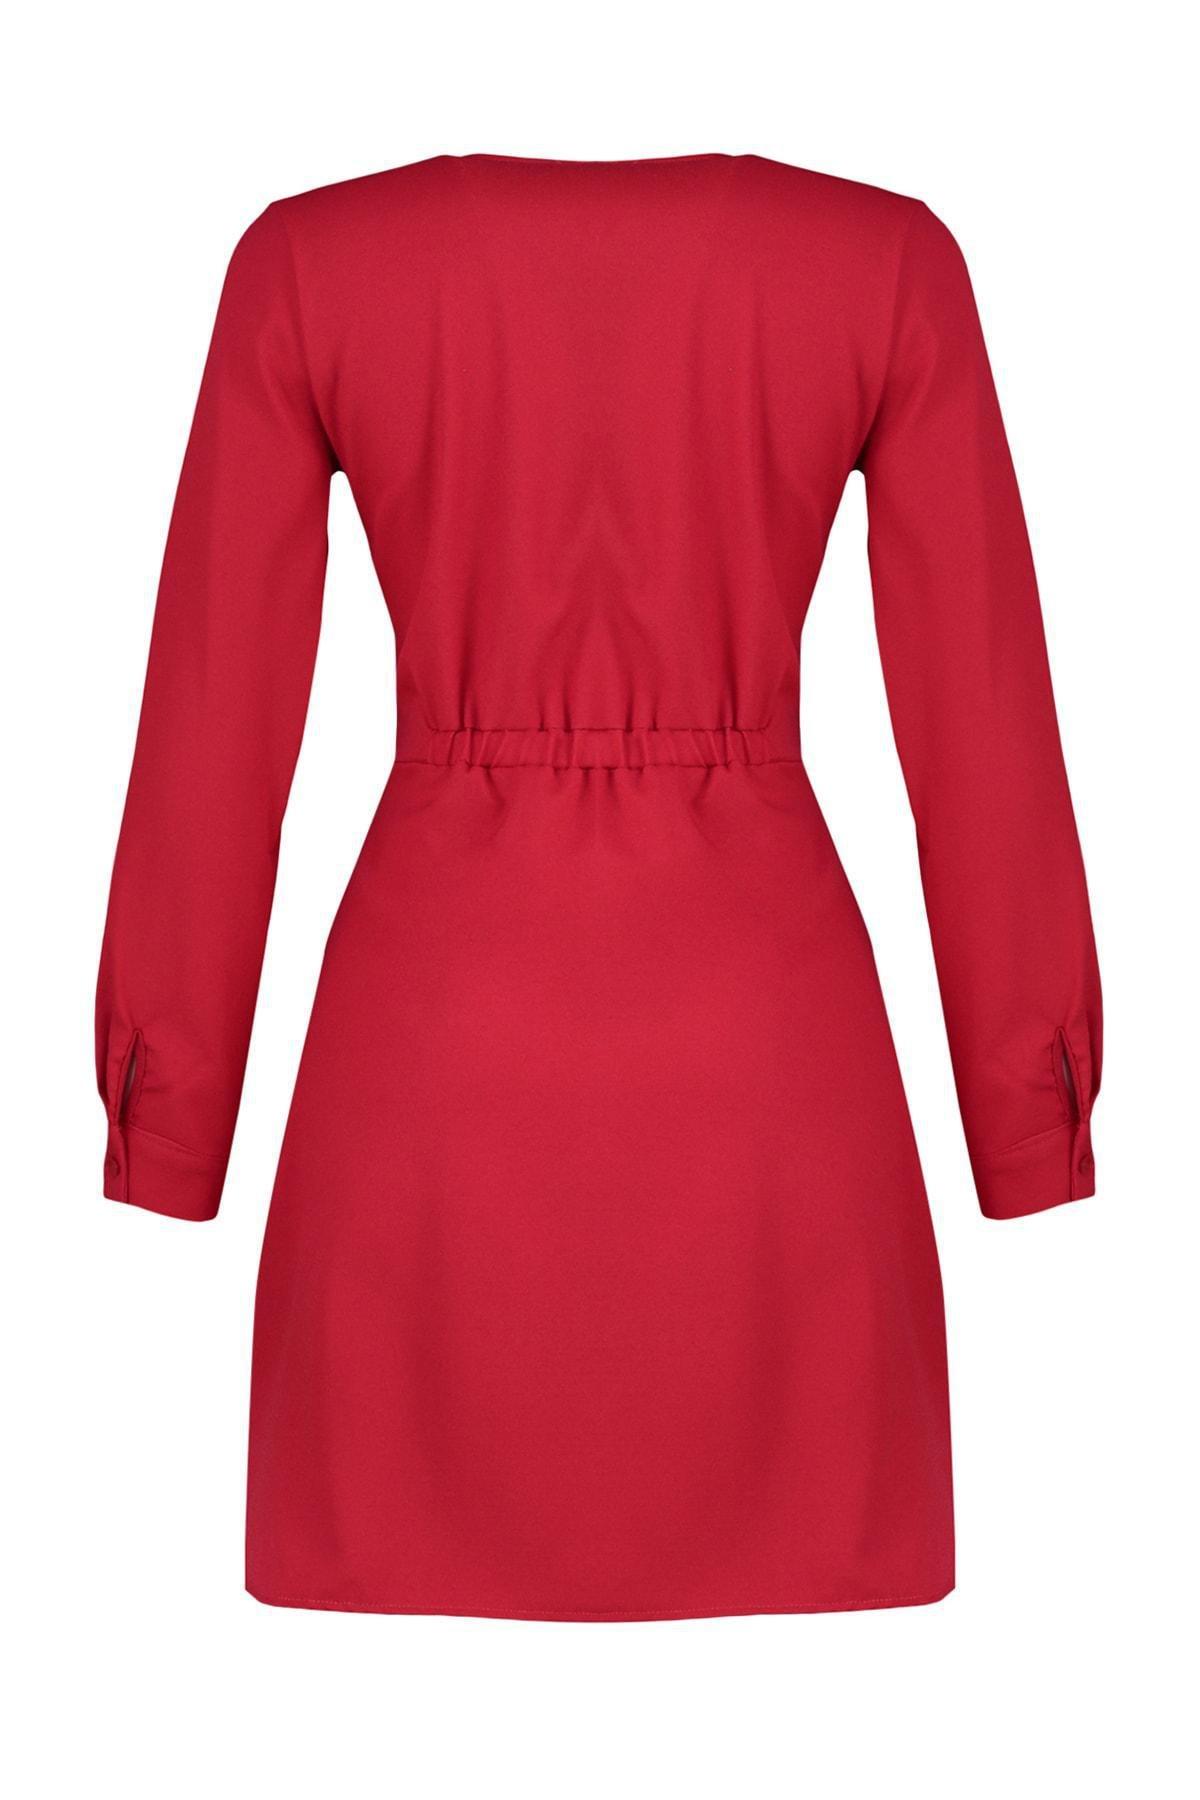 Trendyol - Red Cache-Coeur A-Line Dress